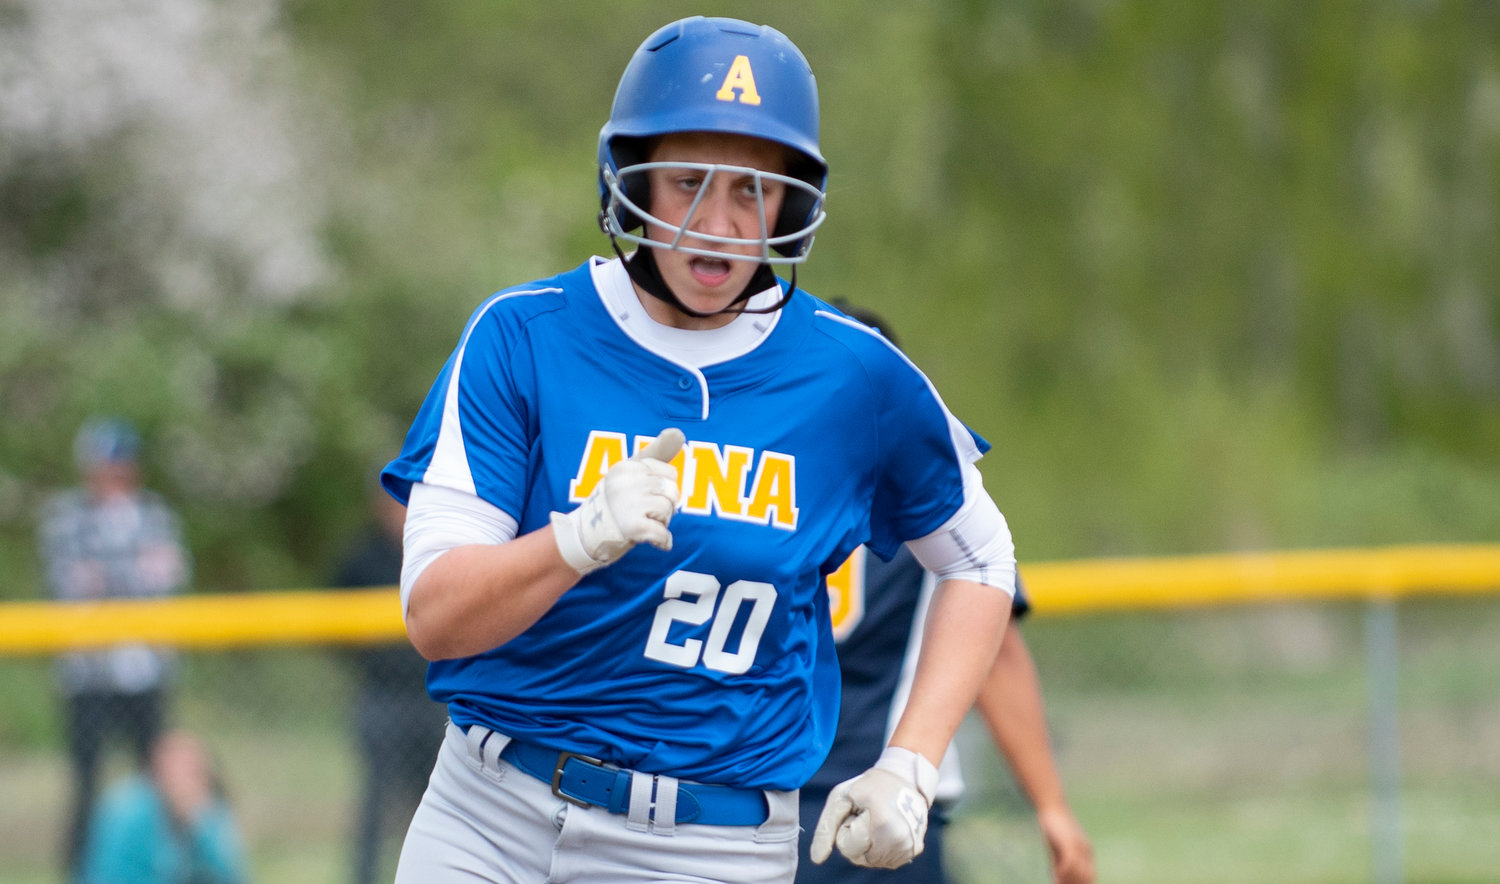 Adna shortstop Karlee Von Moos rounds second base for a triple.